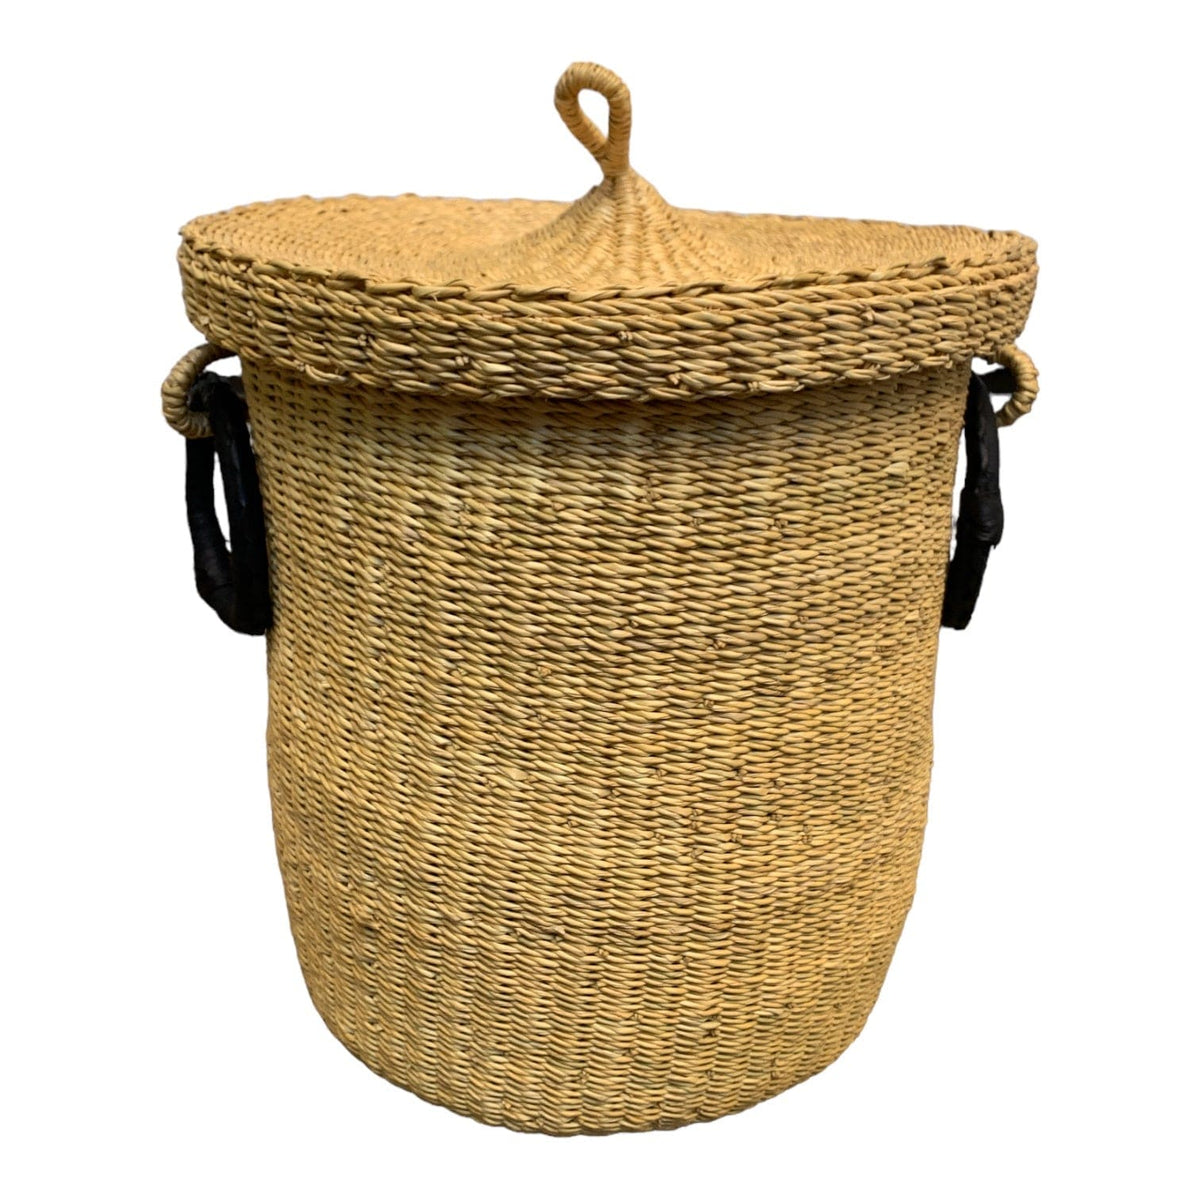 Woven Natural Medium Basket with Lid and side handles Little & Fox